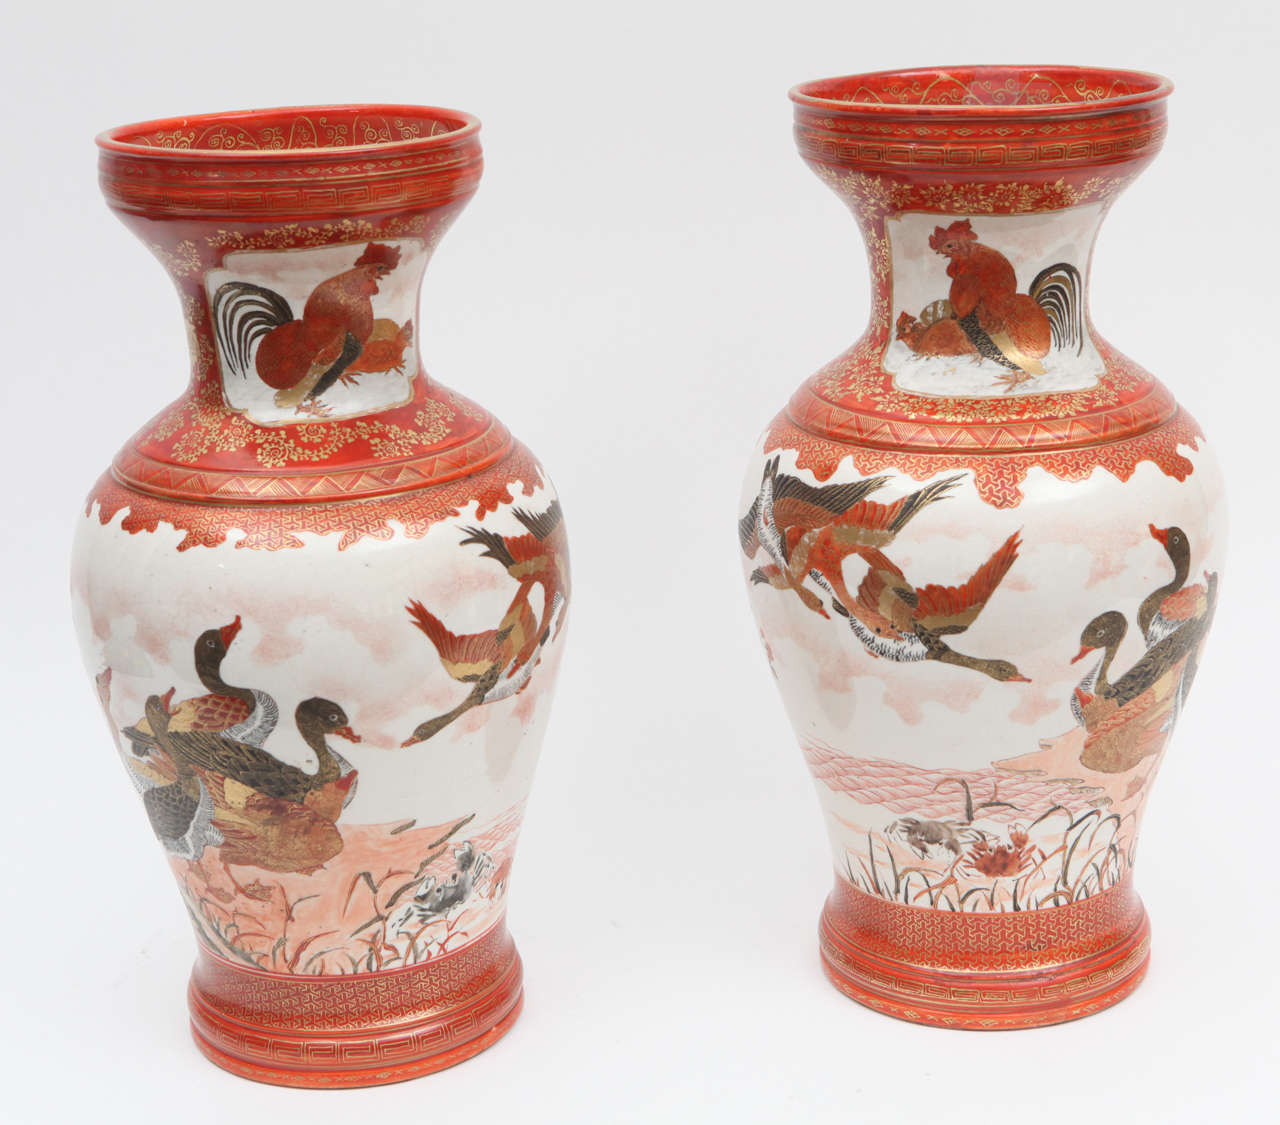 Pair of late 19th century Japanese hand-painted and gilded porcelain kutani vases. These vases are signed.